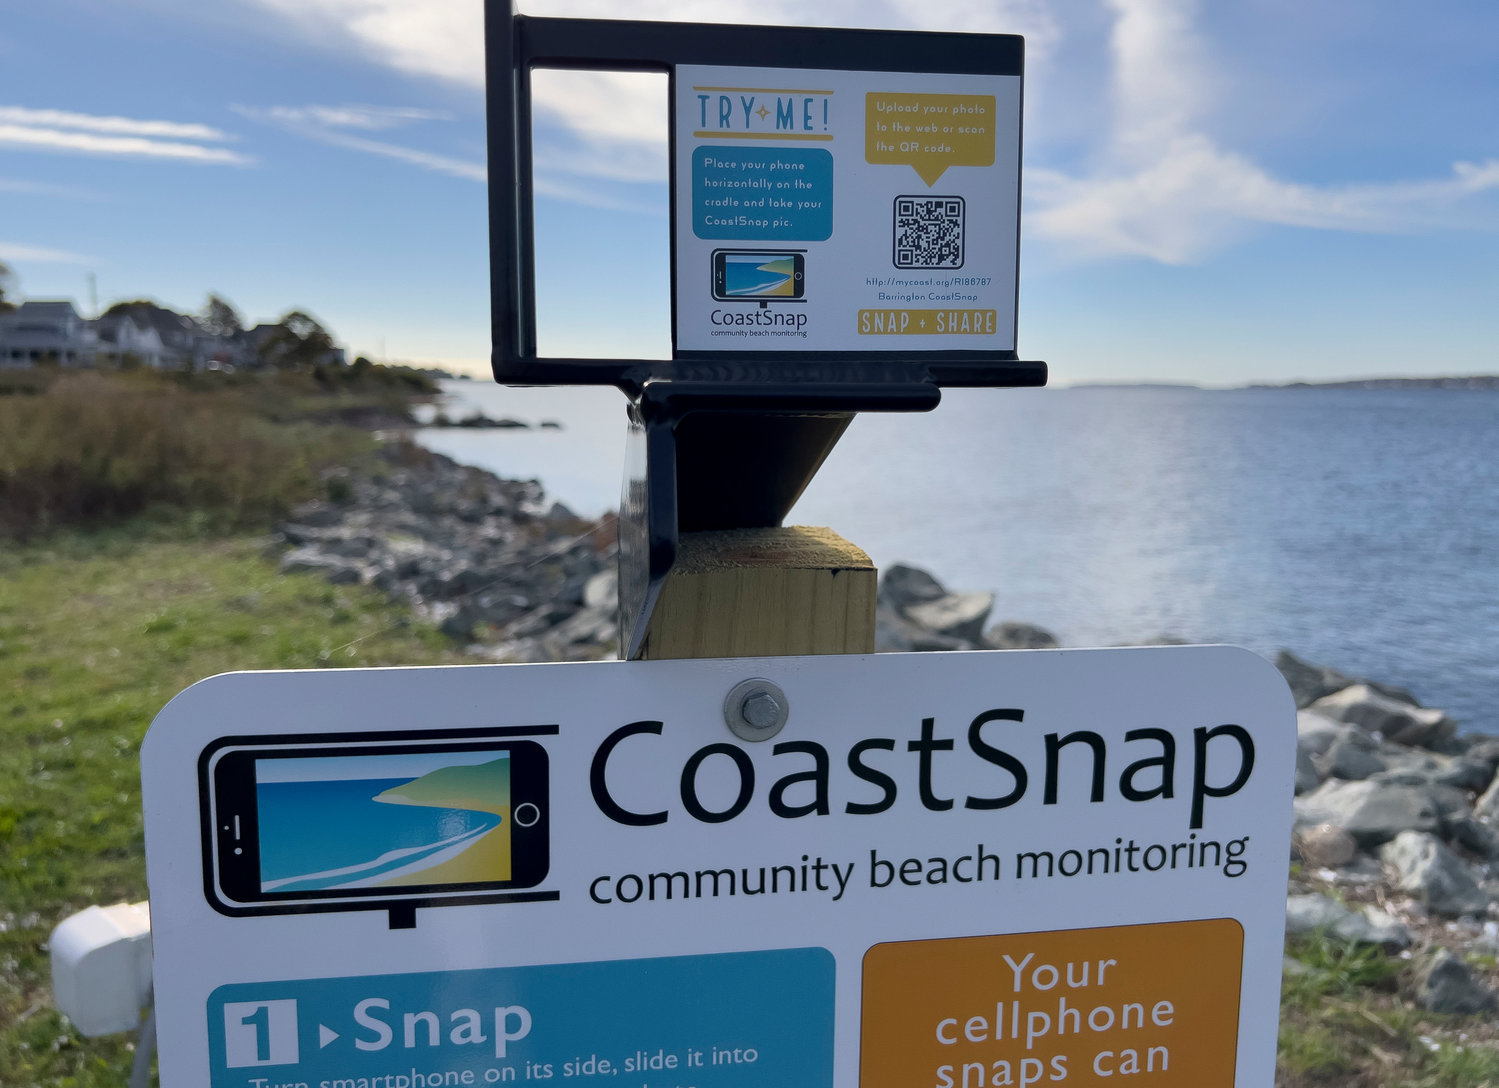 The CoastSnap Station cradle allows people to take photos from the same vantage point and, over time, captures the evolution of the shoreline.